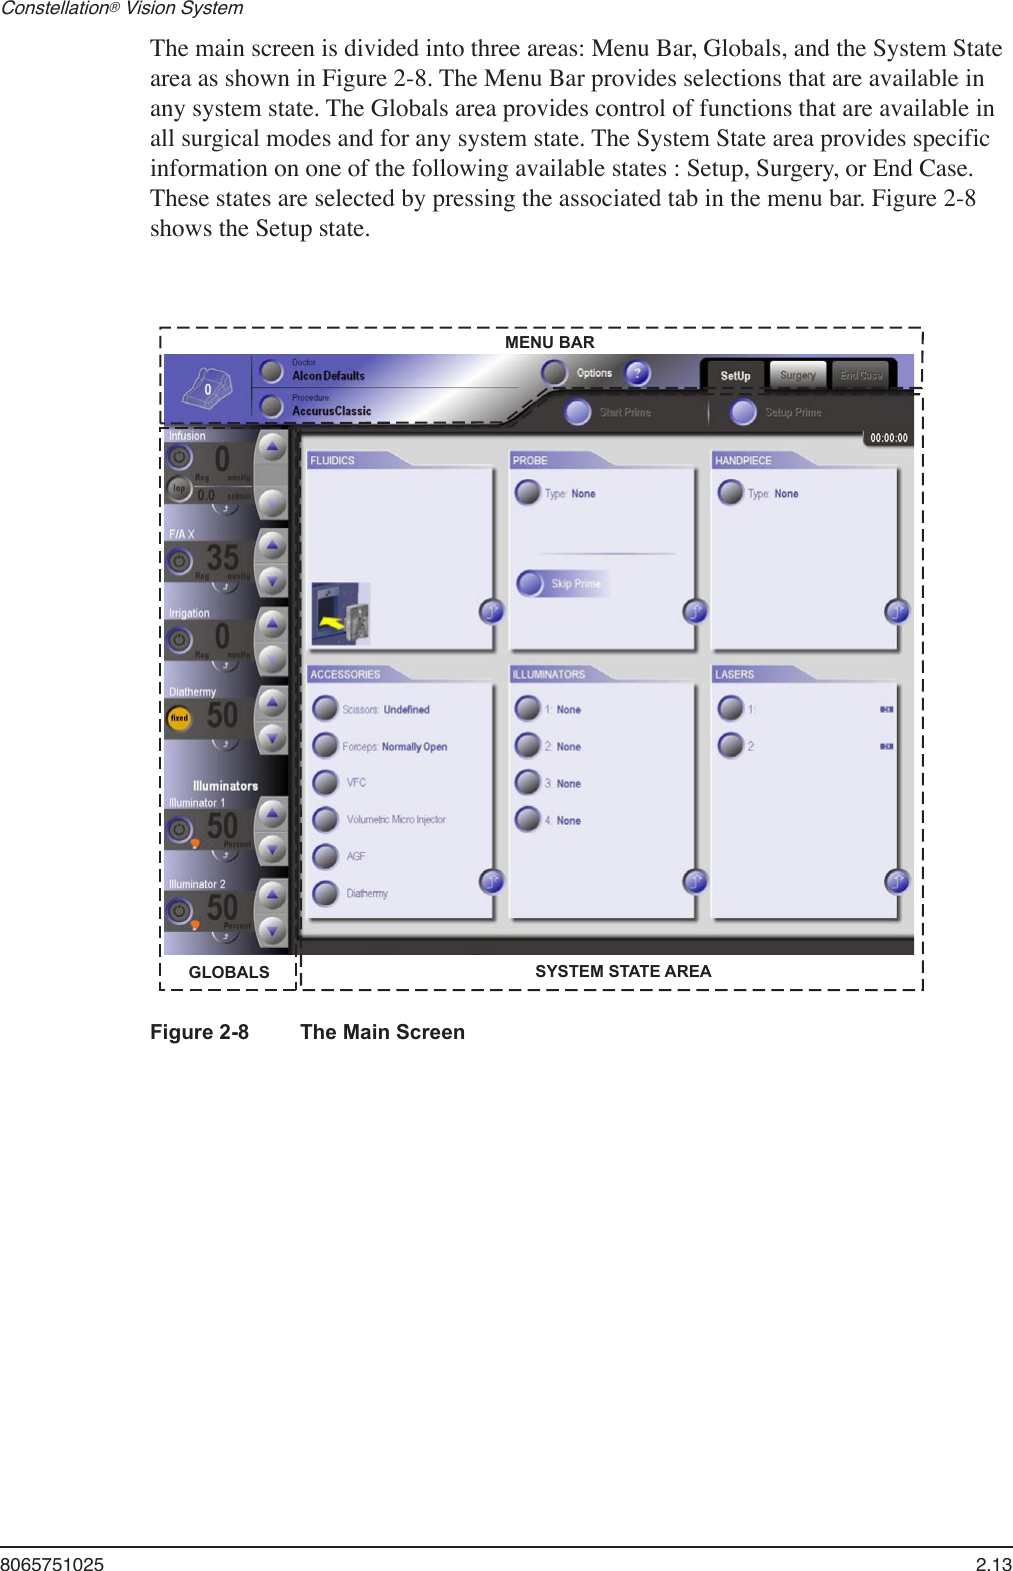 8065751025  2.13Constellation® Vision System The main screen is divided into three areas: Menu Bar, Globals, and the System State area as shown in Figure 2-8. The Menu Bar provides selections that are available in any system state. The Globals area provides control of functions that are available in all surgical modes and for any system state. The System State area provides specific information on one of the following available states : Setup, Surgery, or End Case. These states are selected by pressing the associated tab in the menu bar. Figure 2-8 shows the Setup state.GLOBALSMENU BARSYSTEM STATE AREAFigure 2-8  The Main Screen